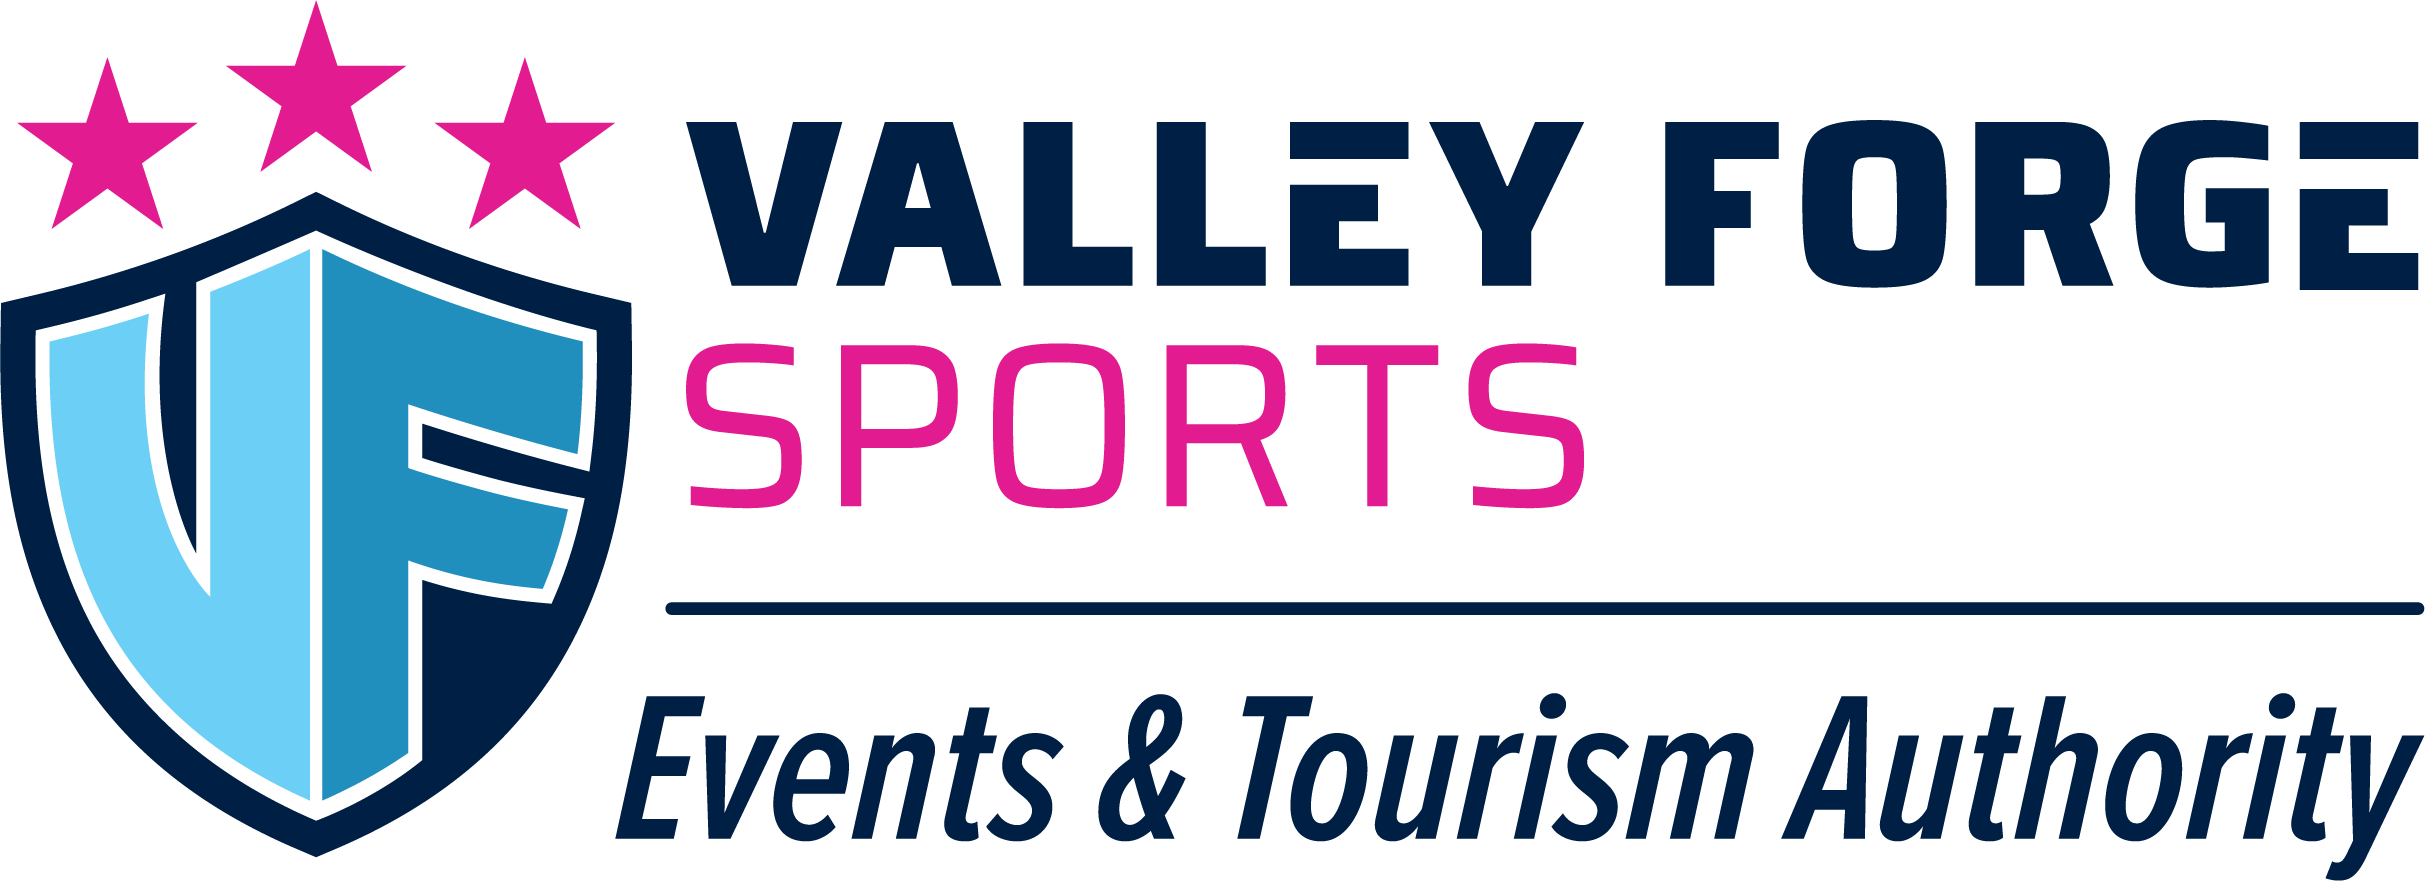 VF Sports Logo 2019_Valley Forge Sports Horiz (1).png